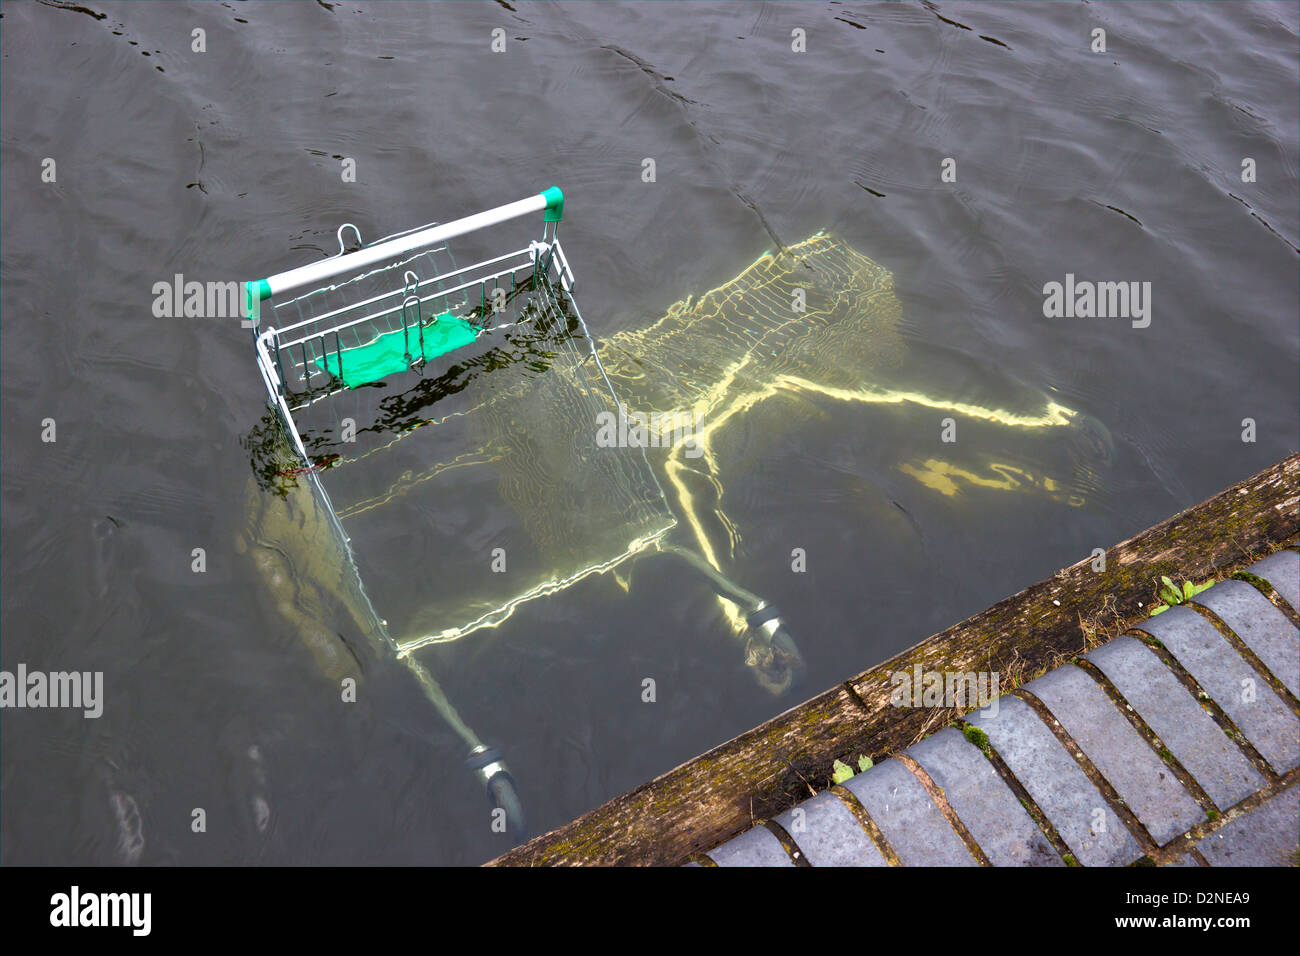 Shopping Trolleys dumped in canal by vandals Stock Photo